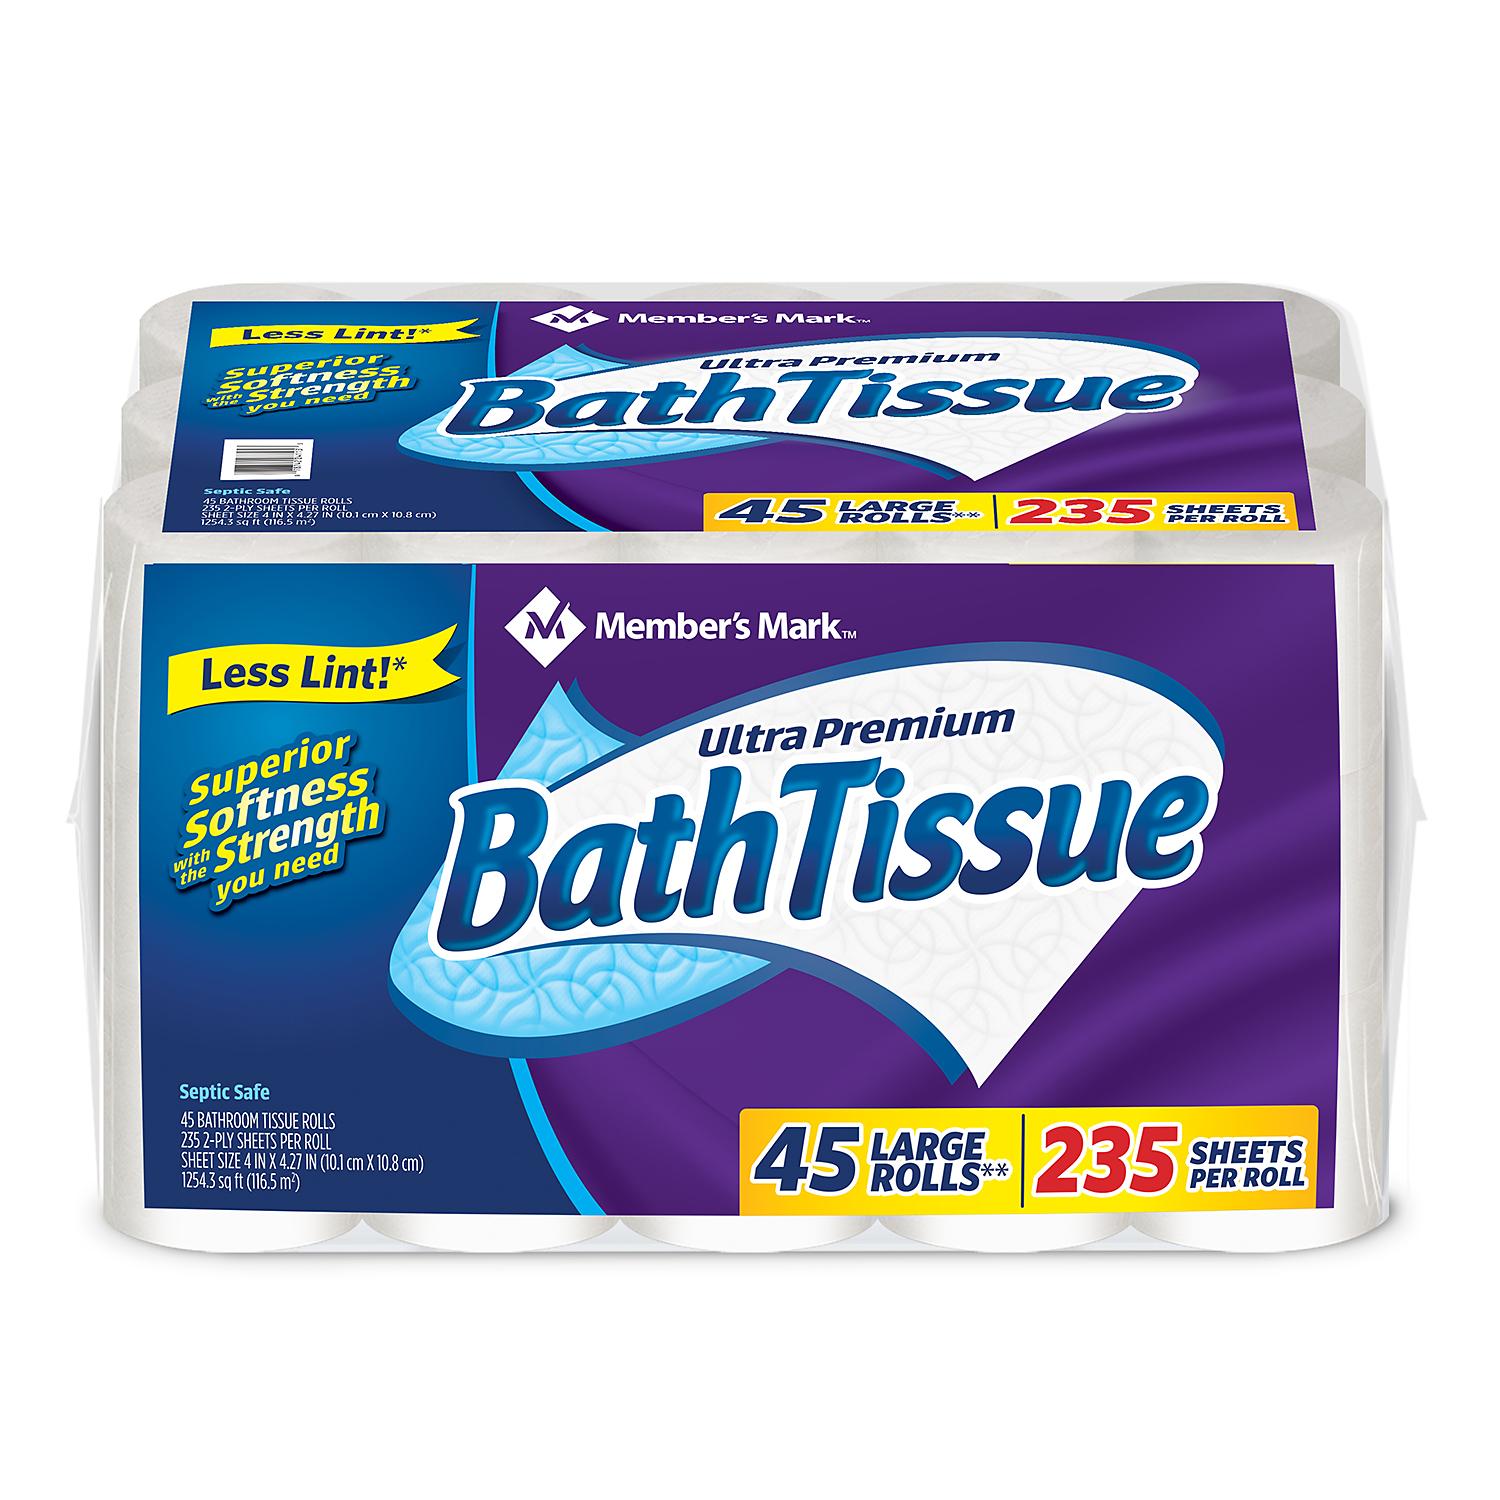 Member's Mark Bath Tissue, 2-Ply Large Roll Toilet Paper (235 Sheets, 45 Rolls)